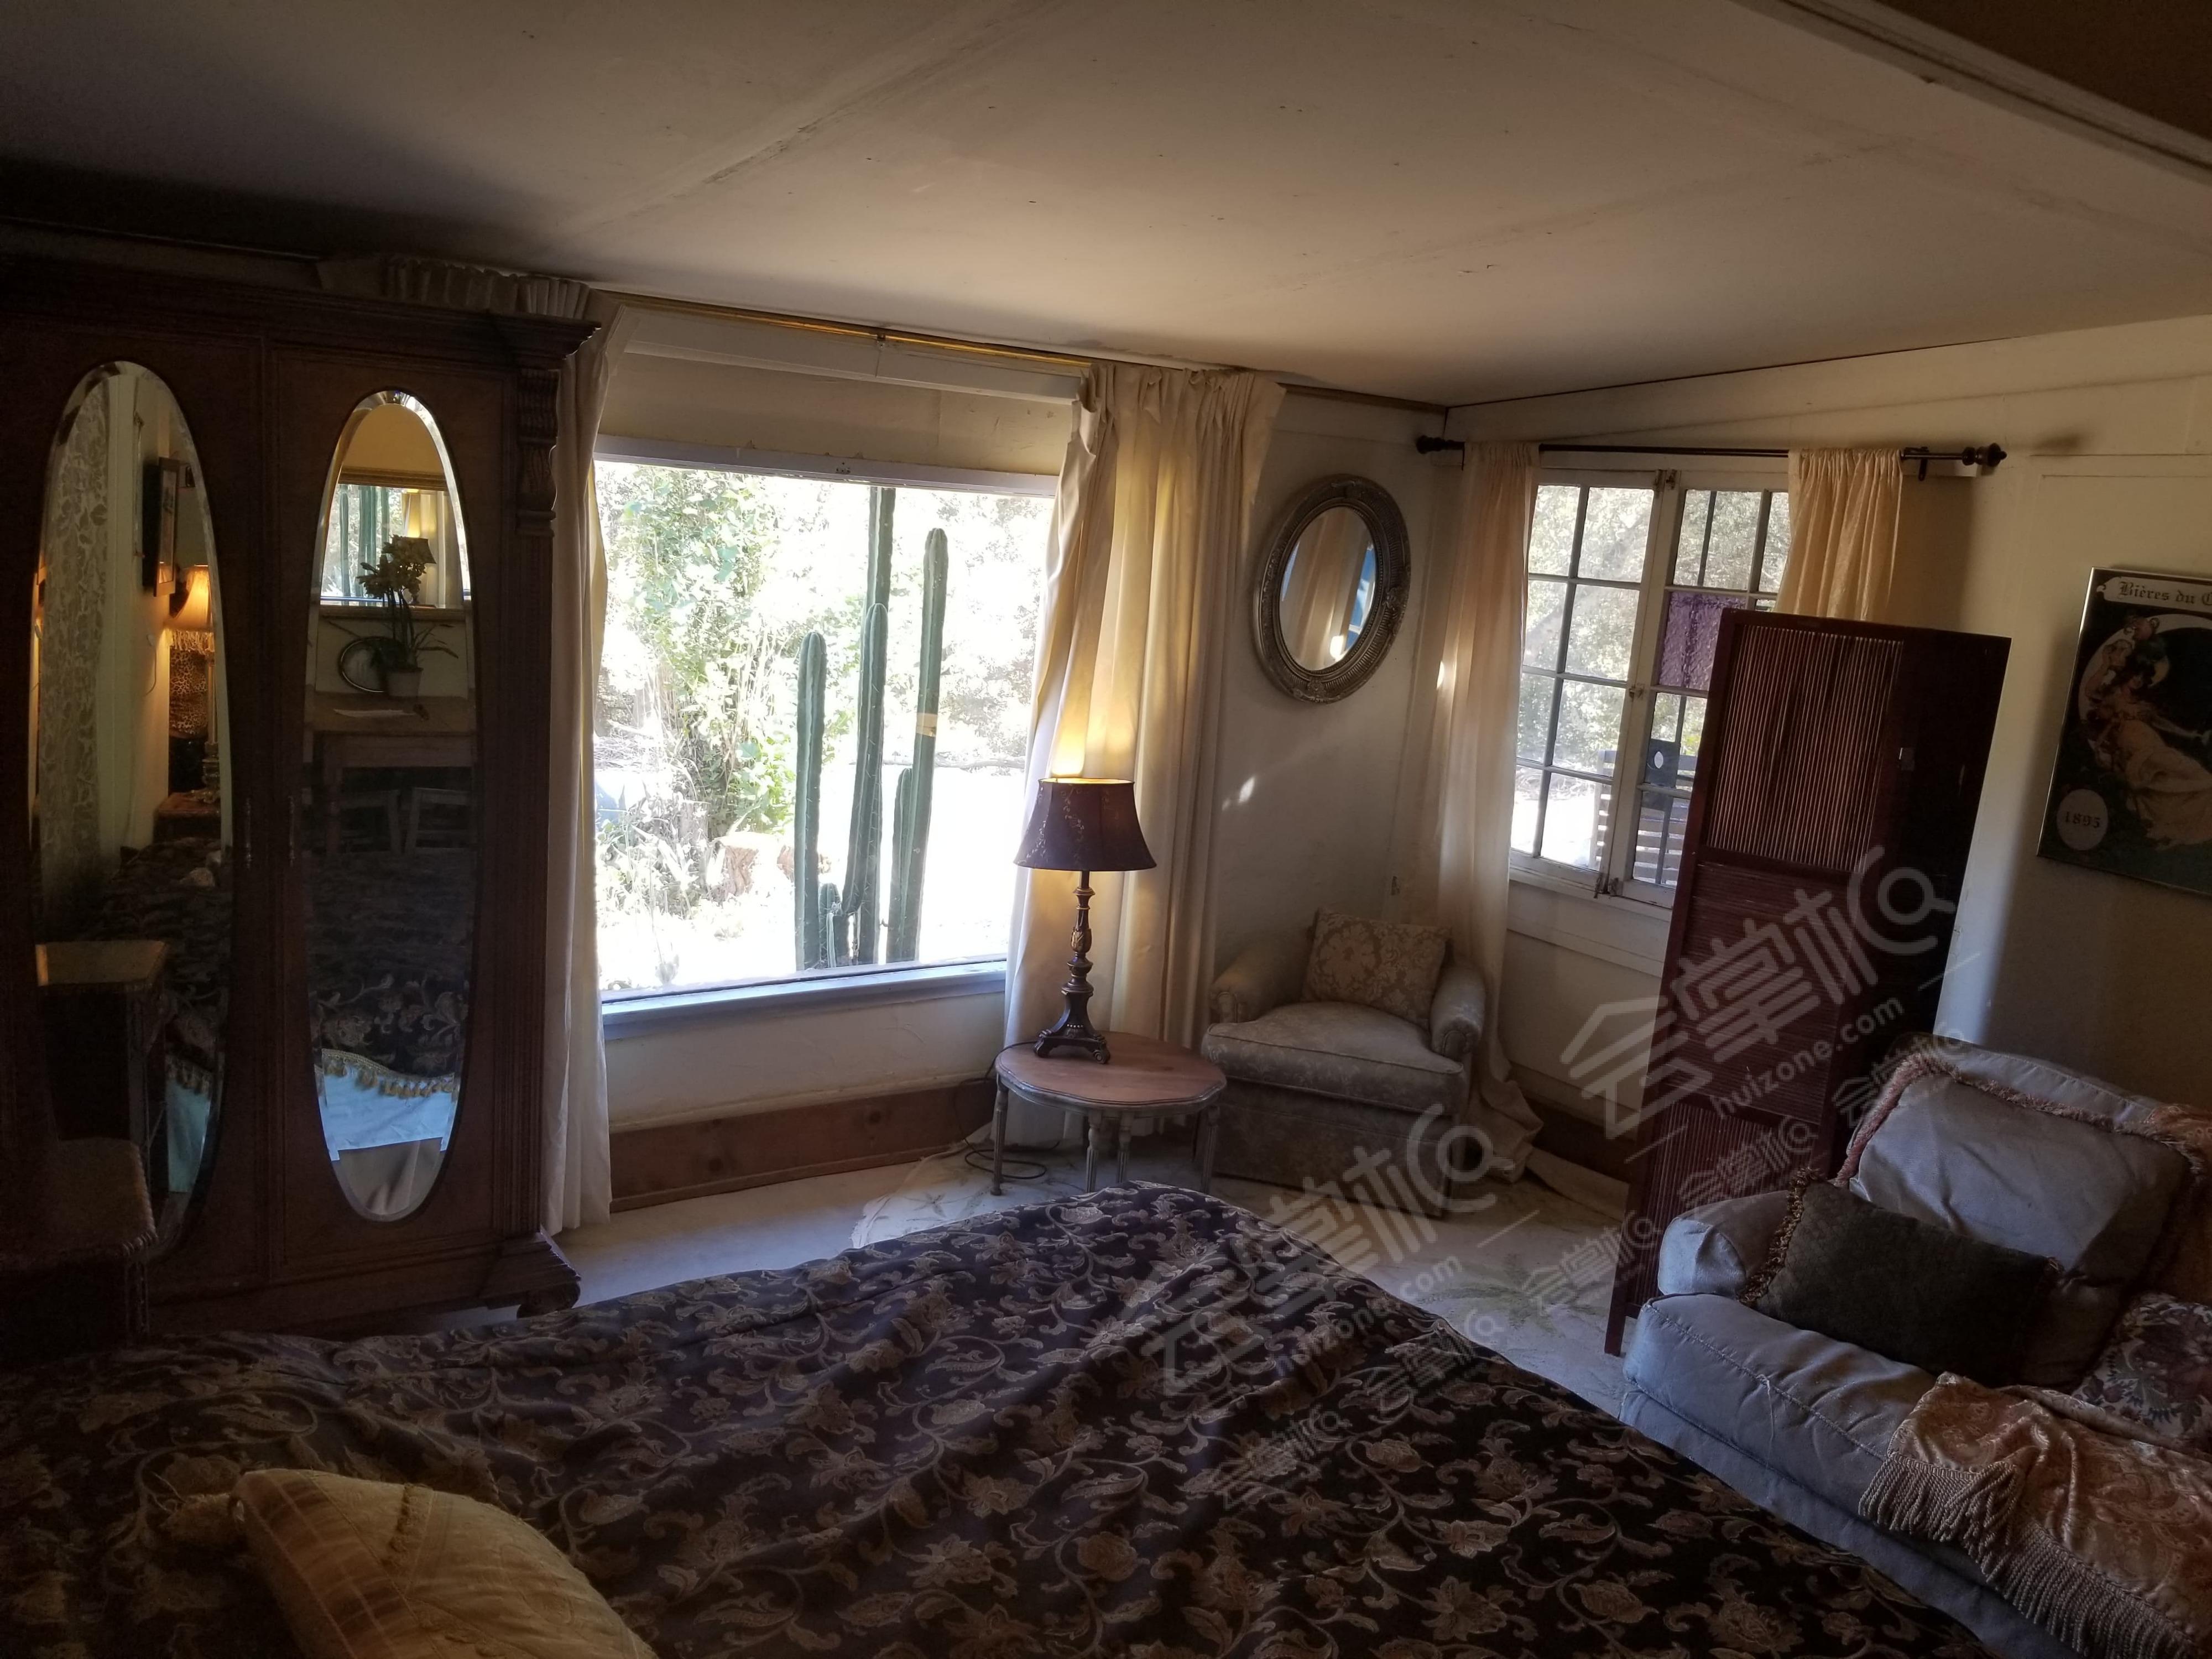 Incredible 13 acre ranch with a dozen artistic rustic cottages surrounded by nature